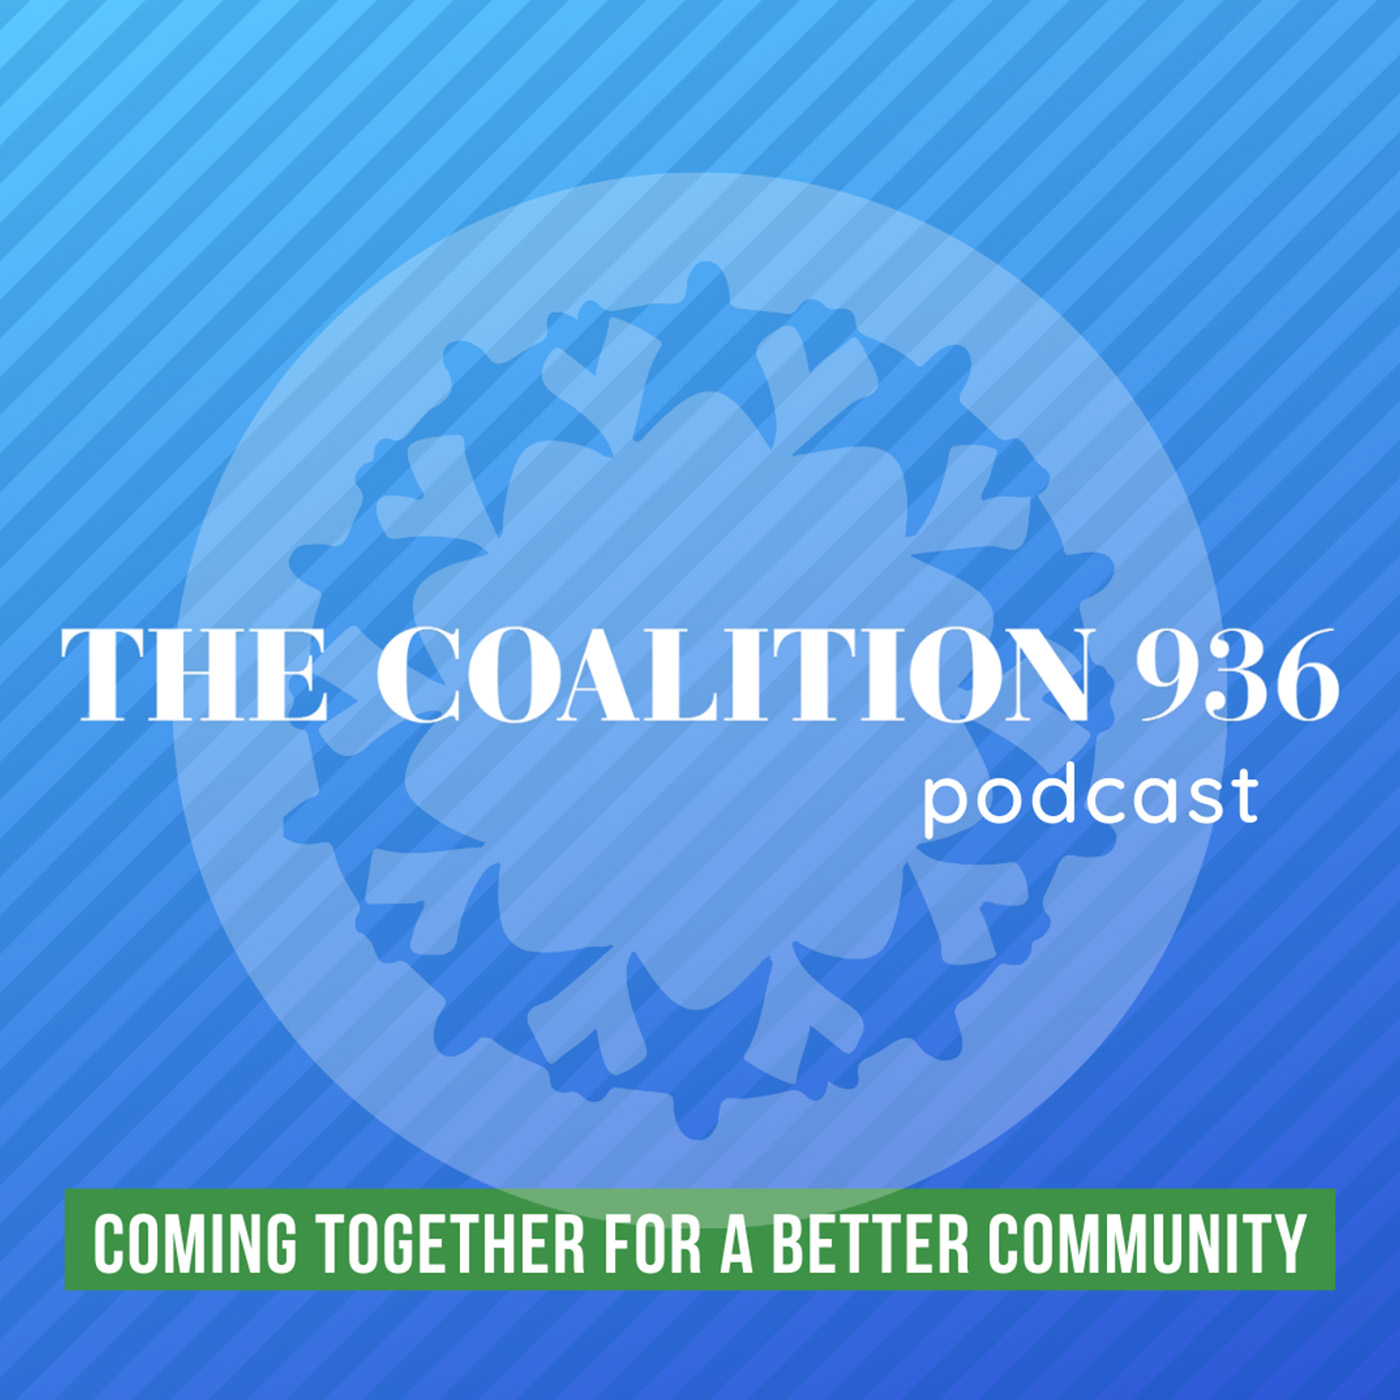 The Coalition 936: Coming Together for a Better Community